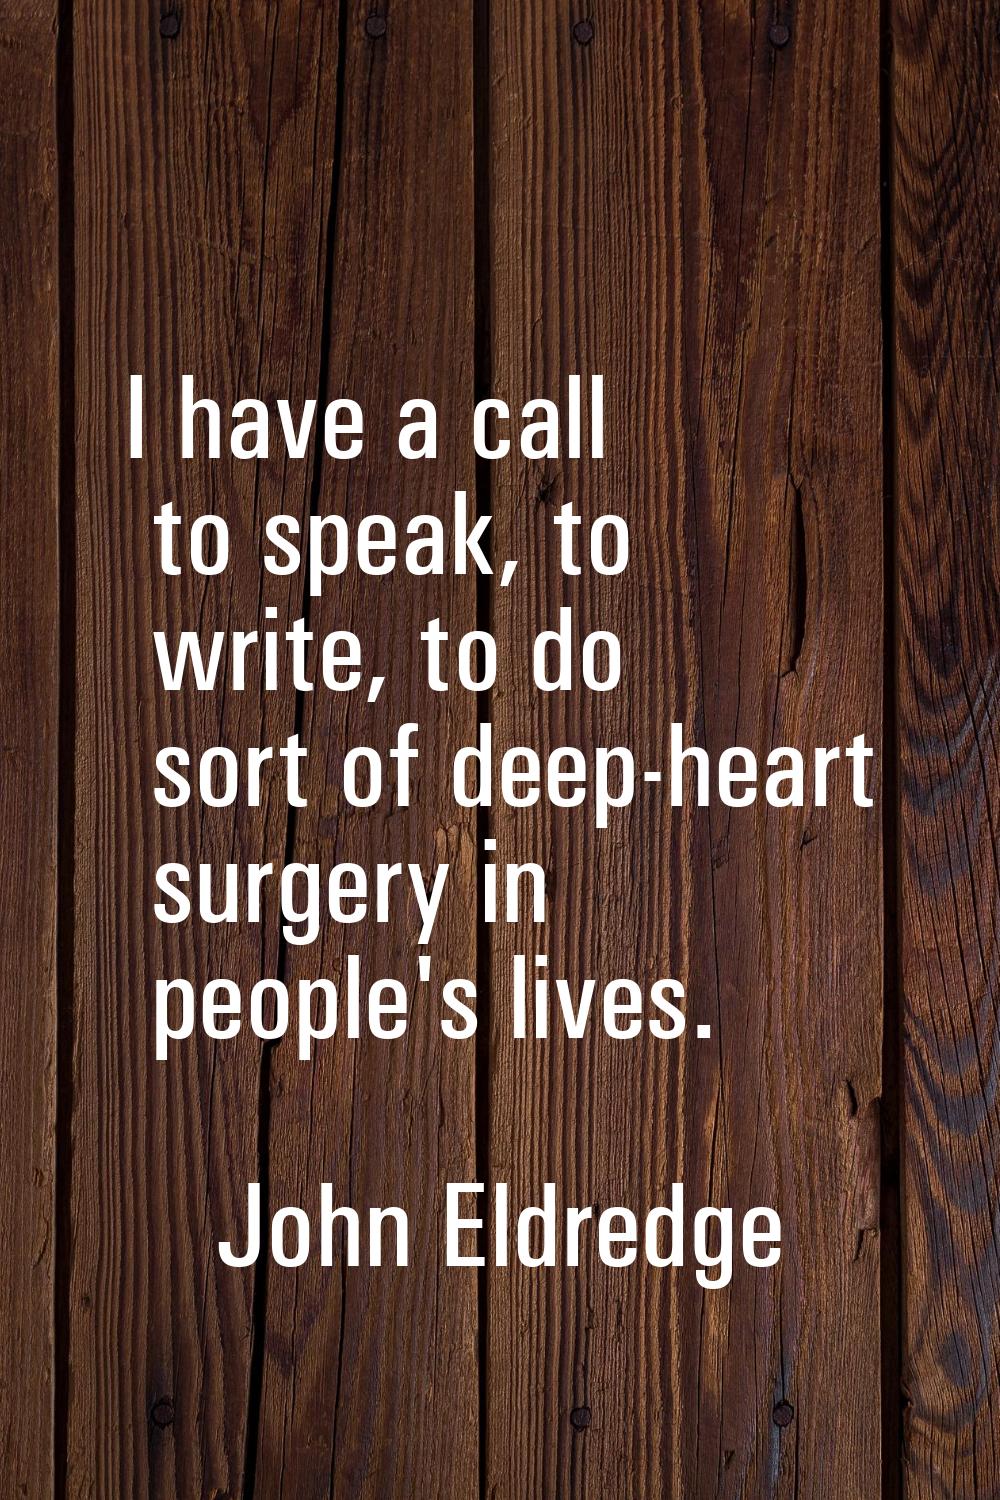 I have a call to speak, to write, to do sort of deep-heart surgery in people's lives.